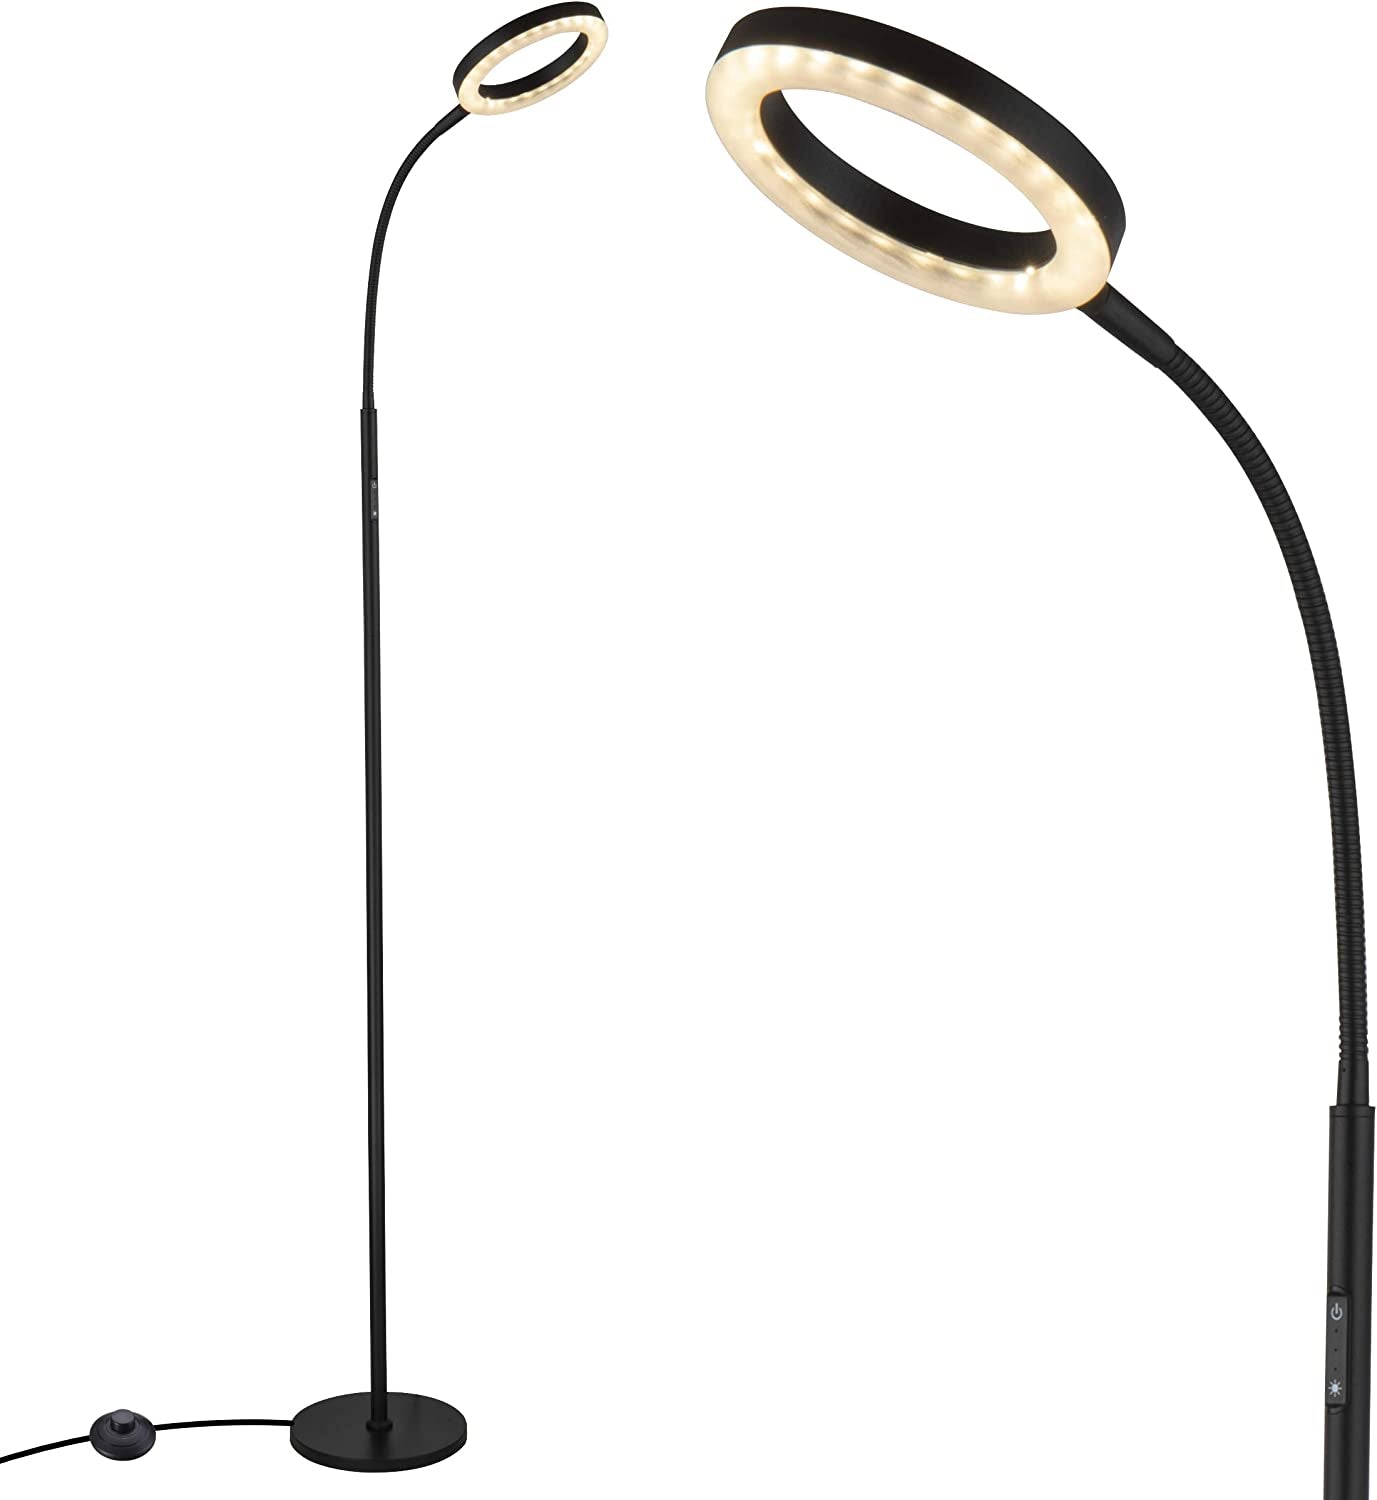 LED Floor Lamp Natural Daylight Reading Light- Bright Integrated LED Standing Lamp with a Cool Light Color Temperature of 4000K and 500 Lumens of Brightness and Two Level Foot Switch (Black)